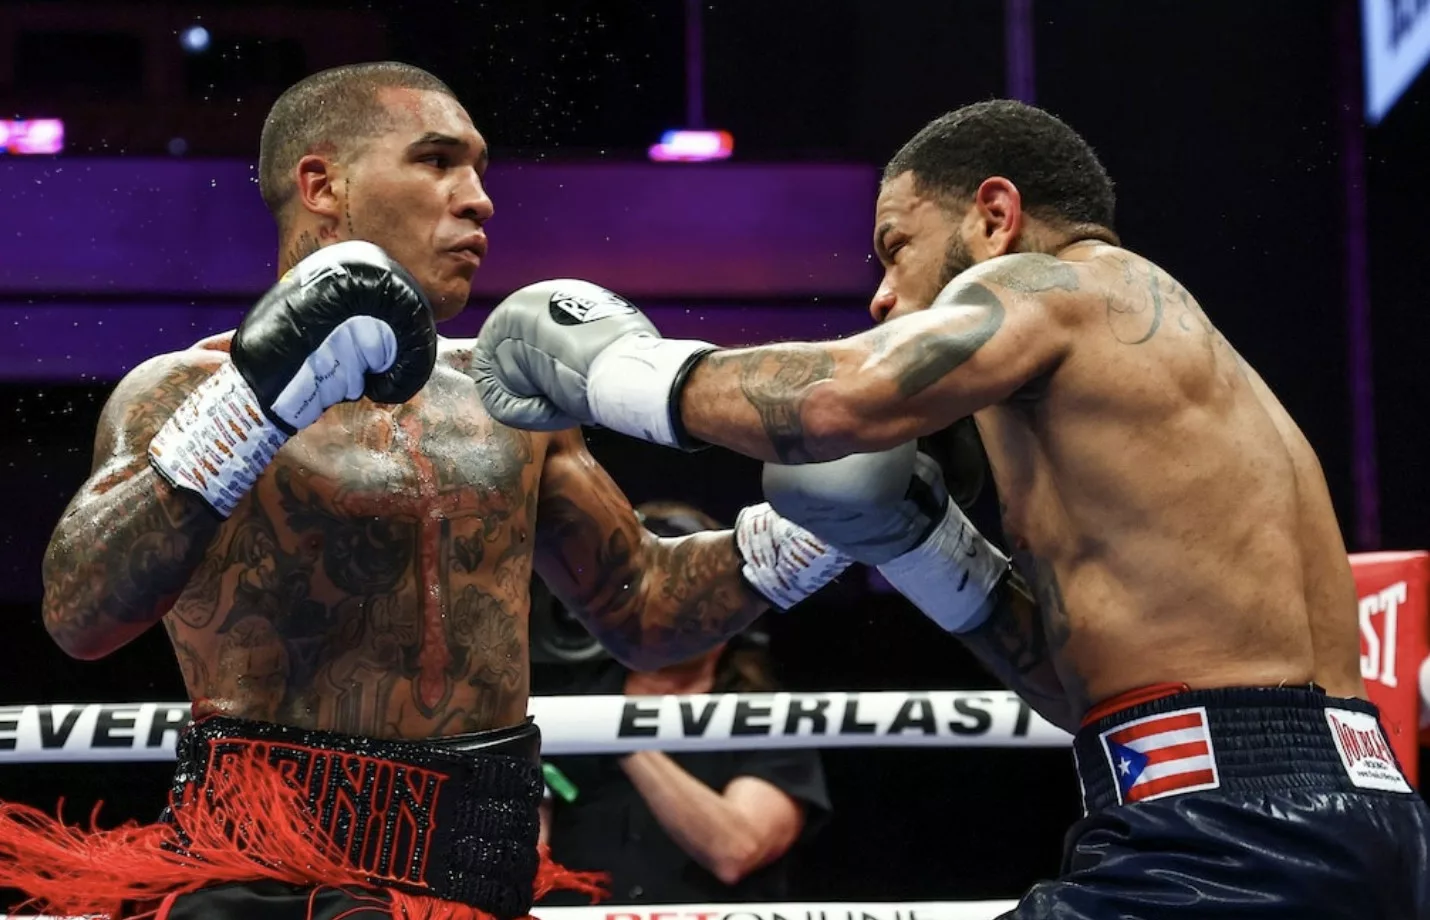 Conor Benn Slammed For His Lack Of Power Following Failed VADA Tests - 'He Is No Longer Armed With Torpedoes'